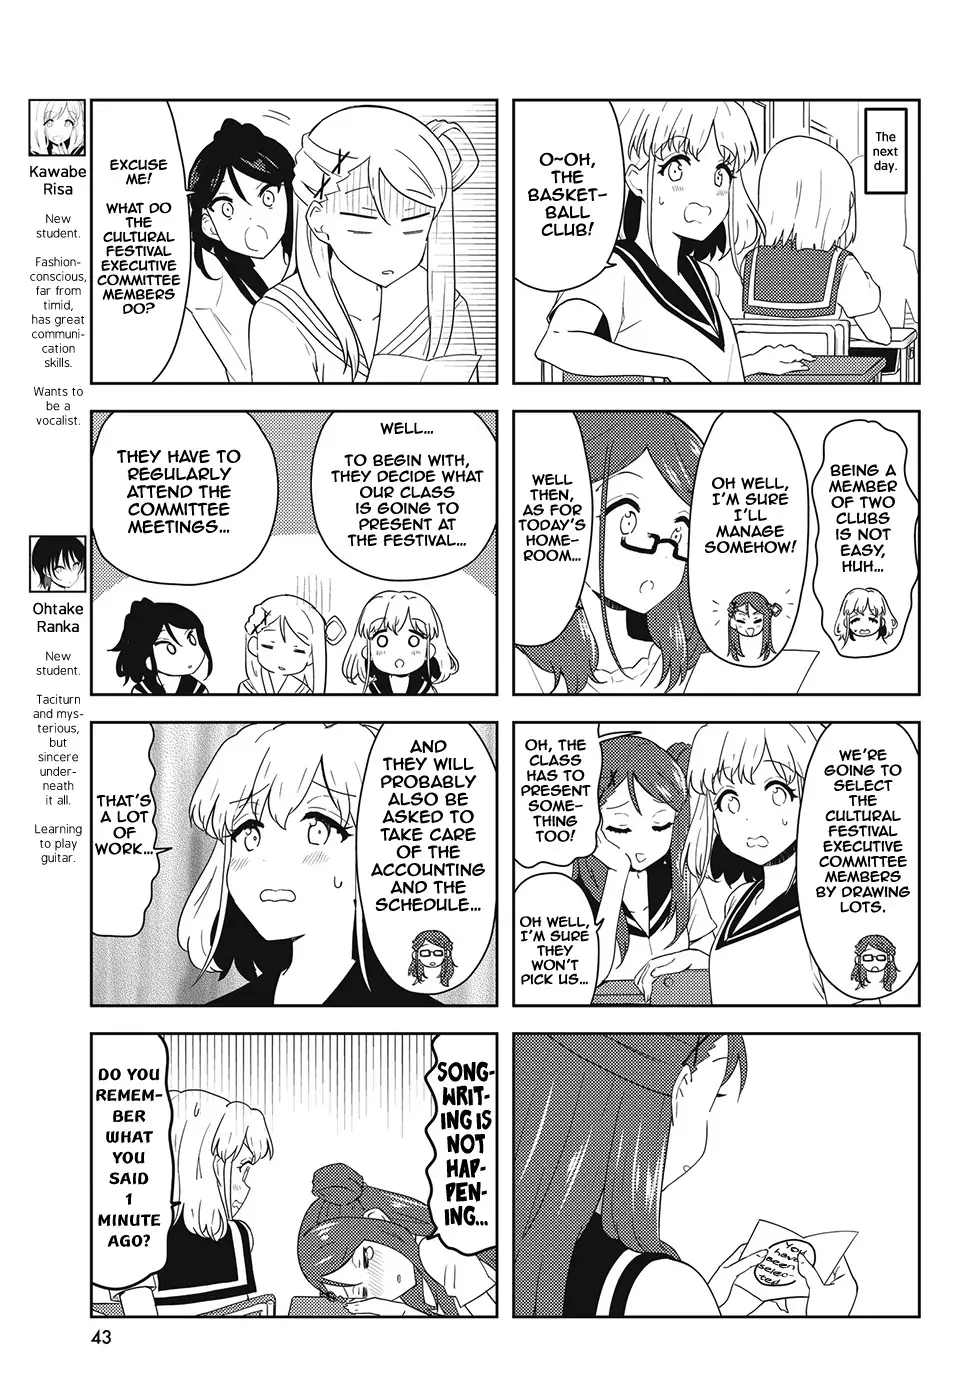 K-On! Shuffle - 47 page 5-90611b9d